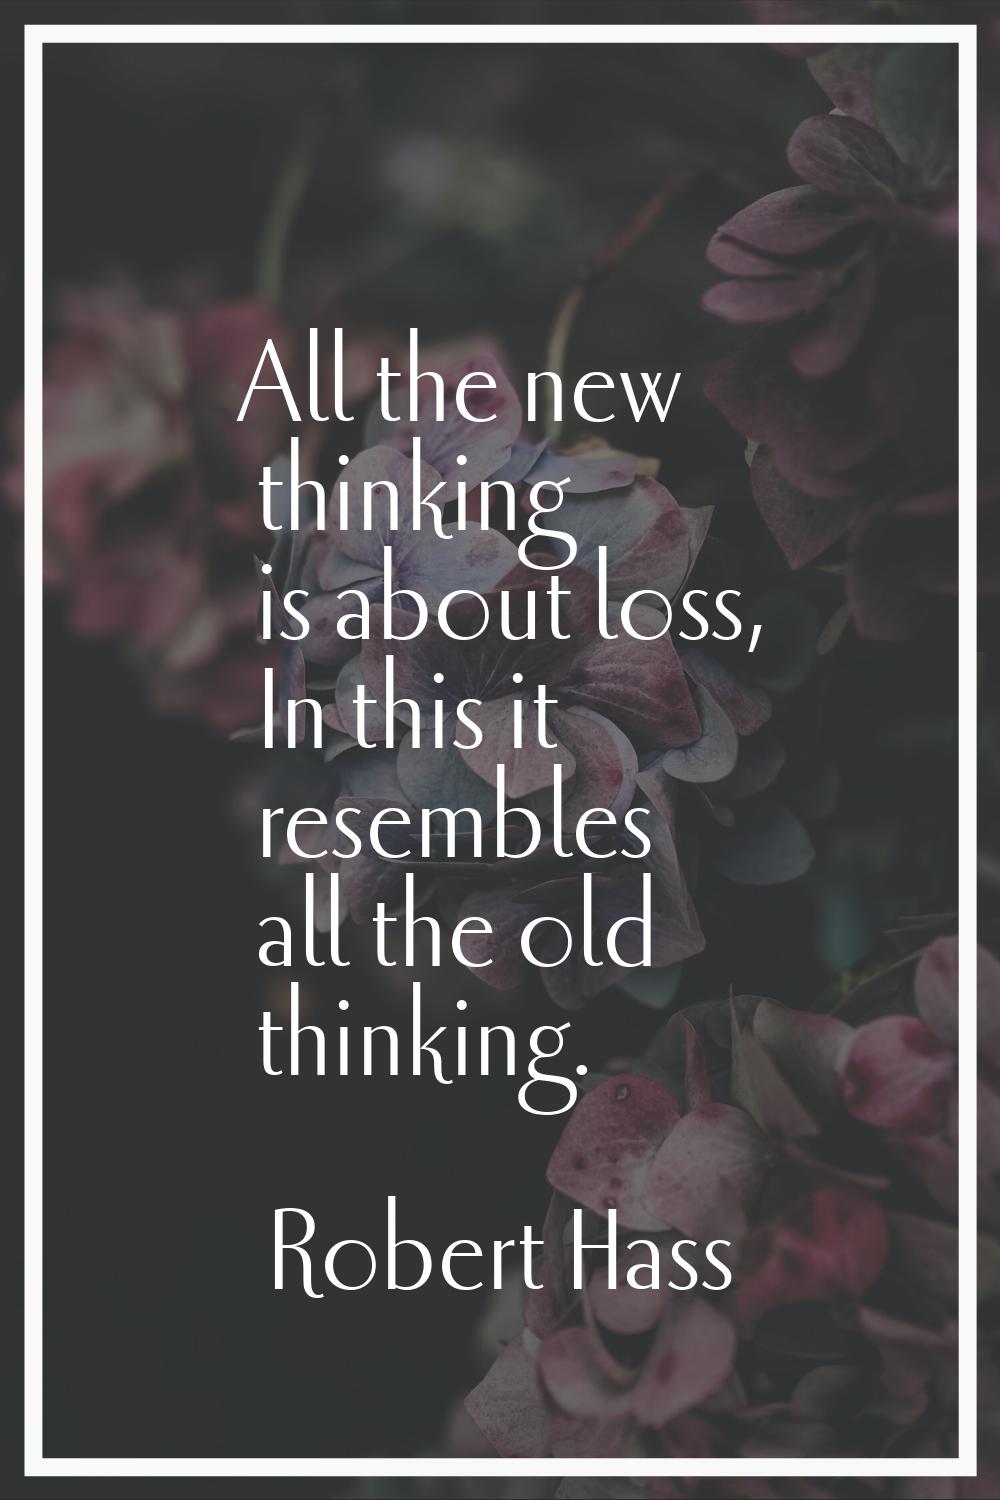 All the new thinking is about loss, In this it resembles all the old thinking.